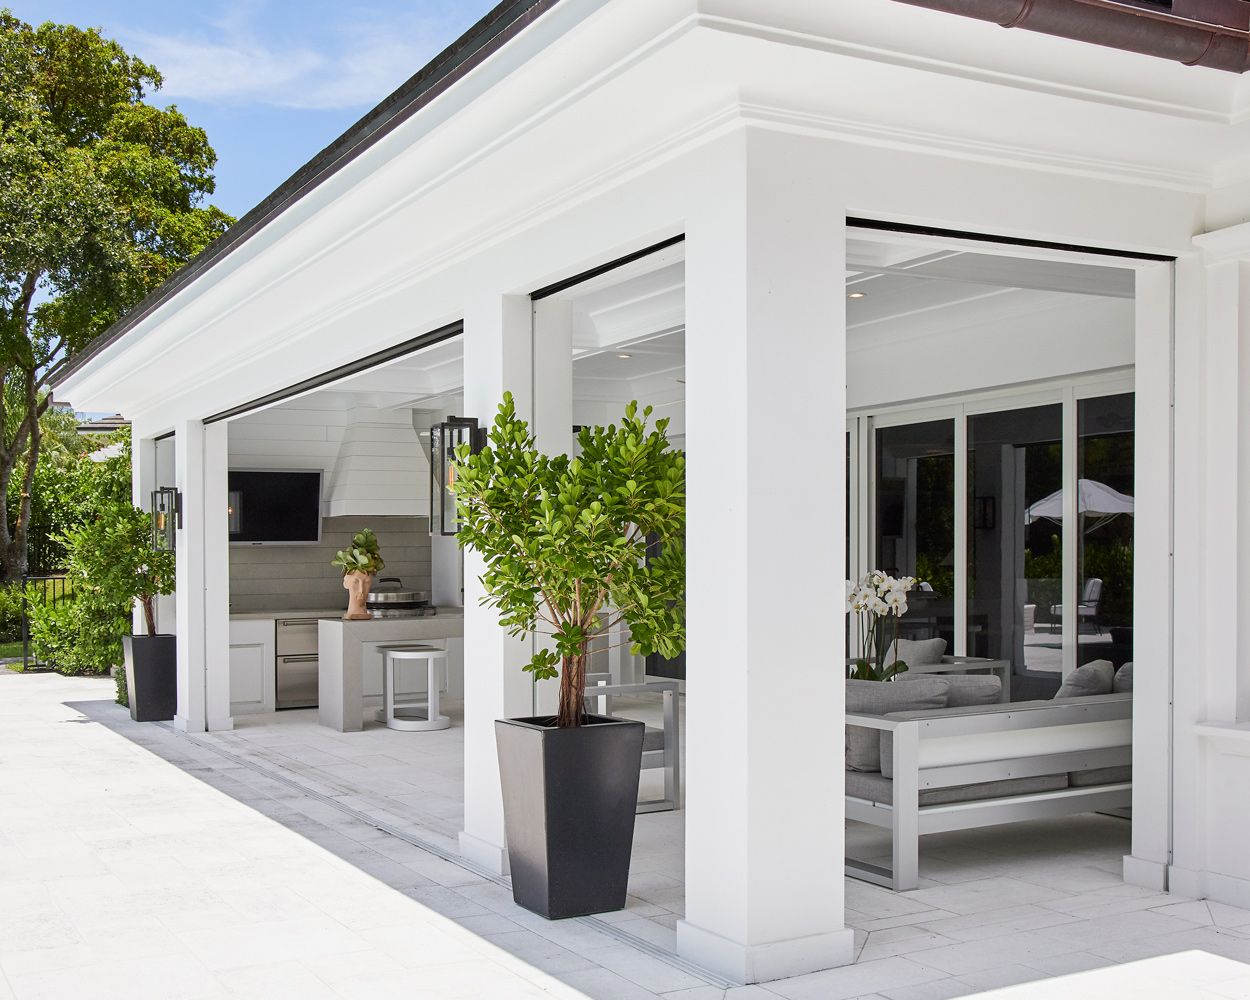 A patio with white pillars and potted trees.